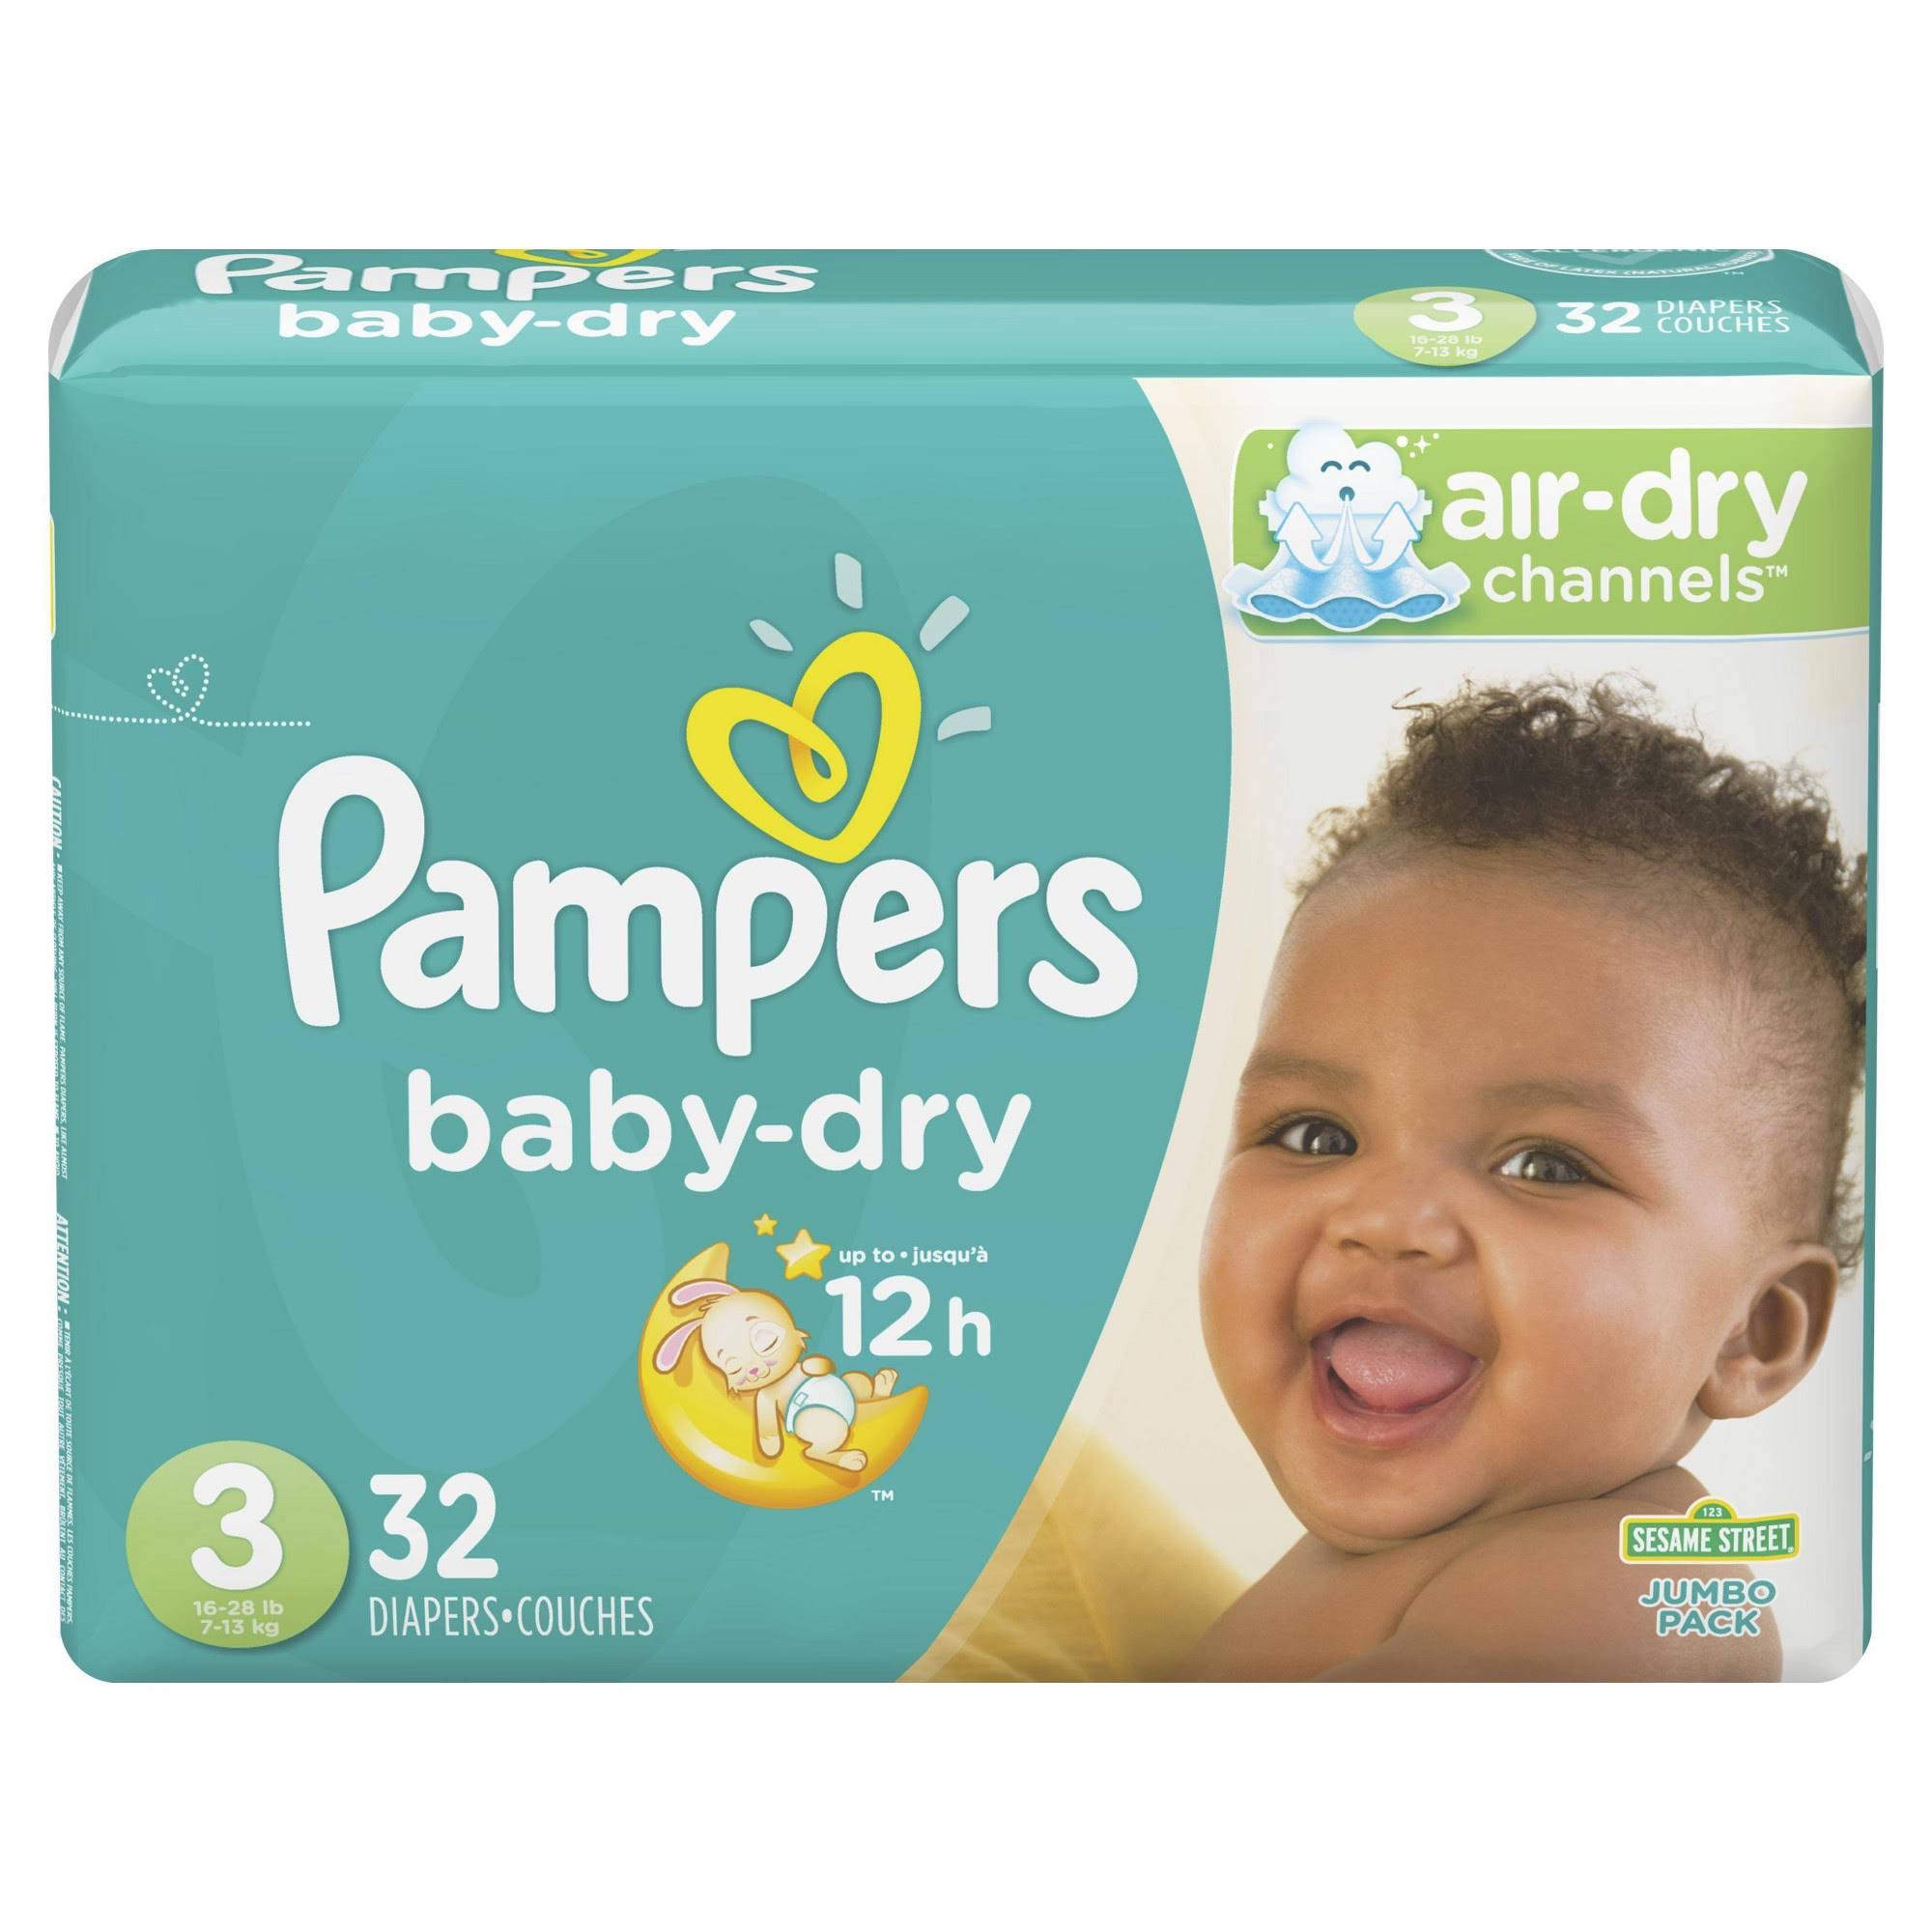 Pampers Baby Dry Diapers - Size 3, 16-28 lb, x32